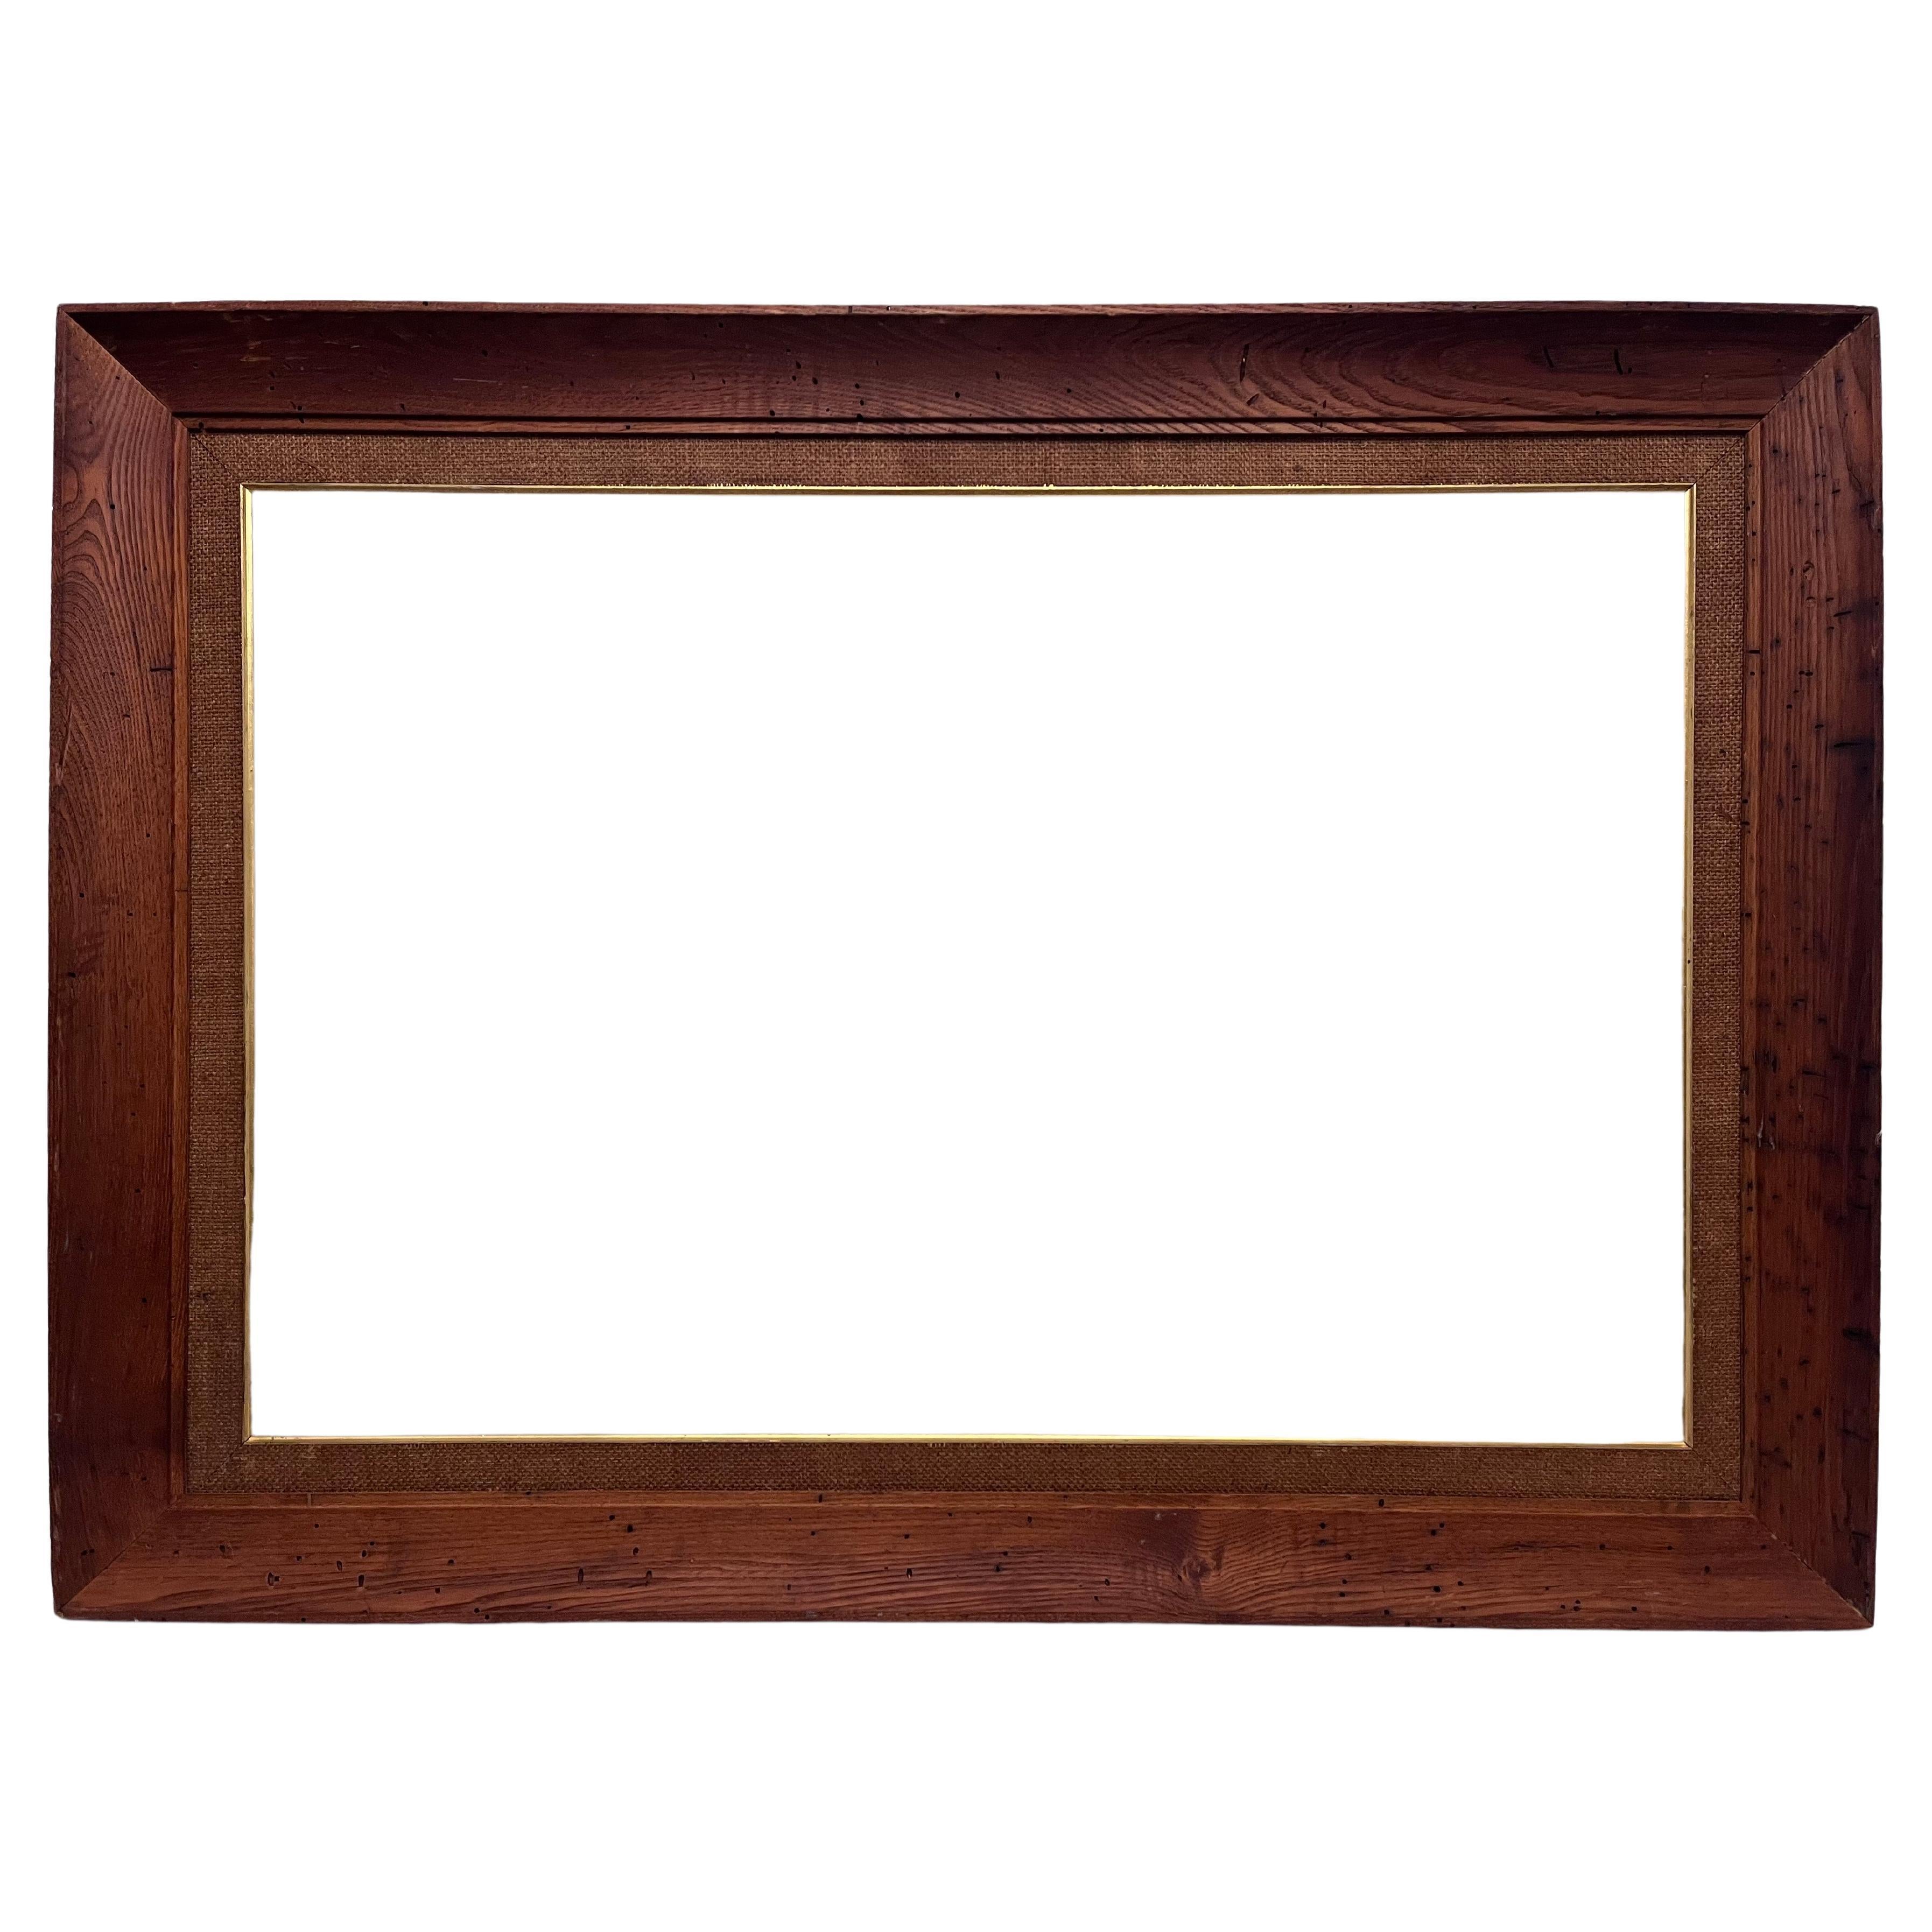 Mid 20th Century Large Wormy Chestnut Modernist Style Picture Frame 36 x 24 For Sale